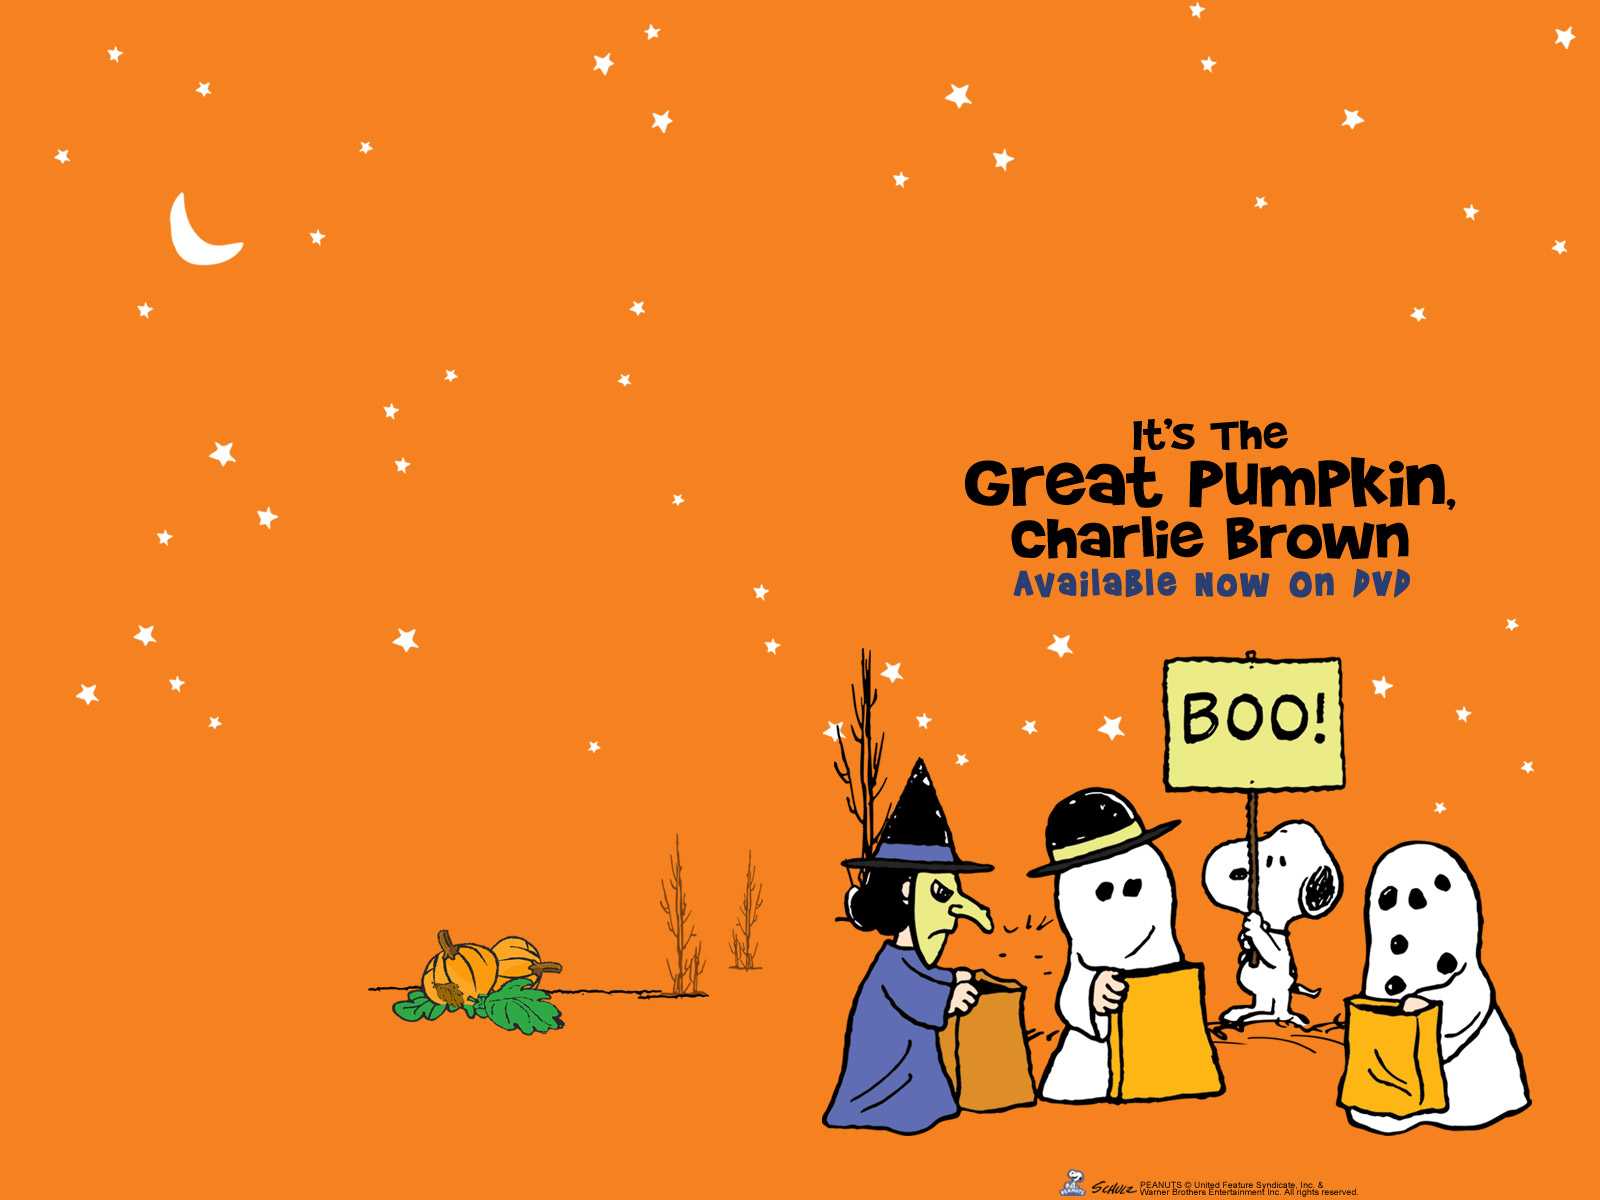 Its The Great Pumpkin Charlie Brown Air Date 2021  How to Watch Charlie  Brown Great Pumpkin on TV